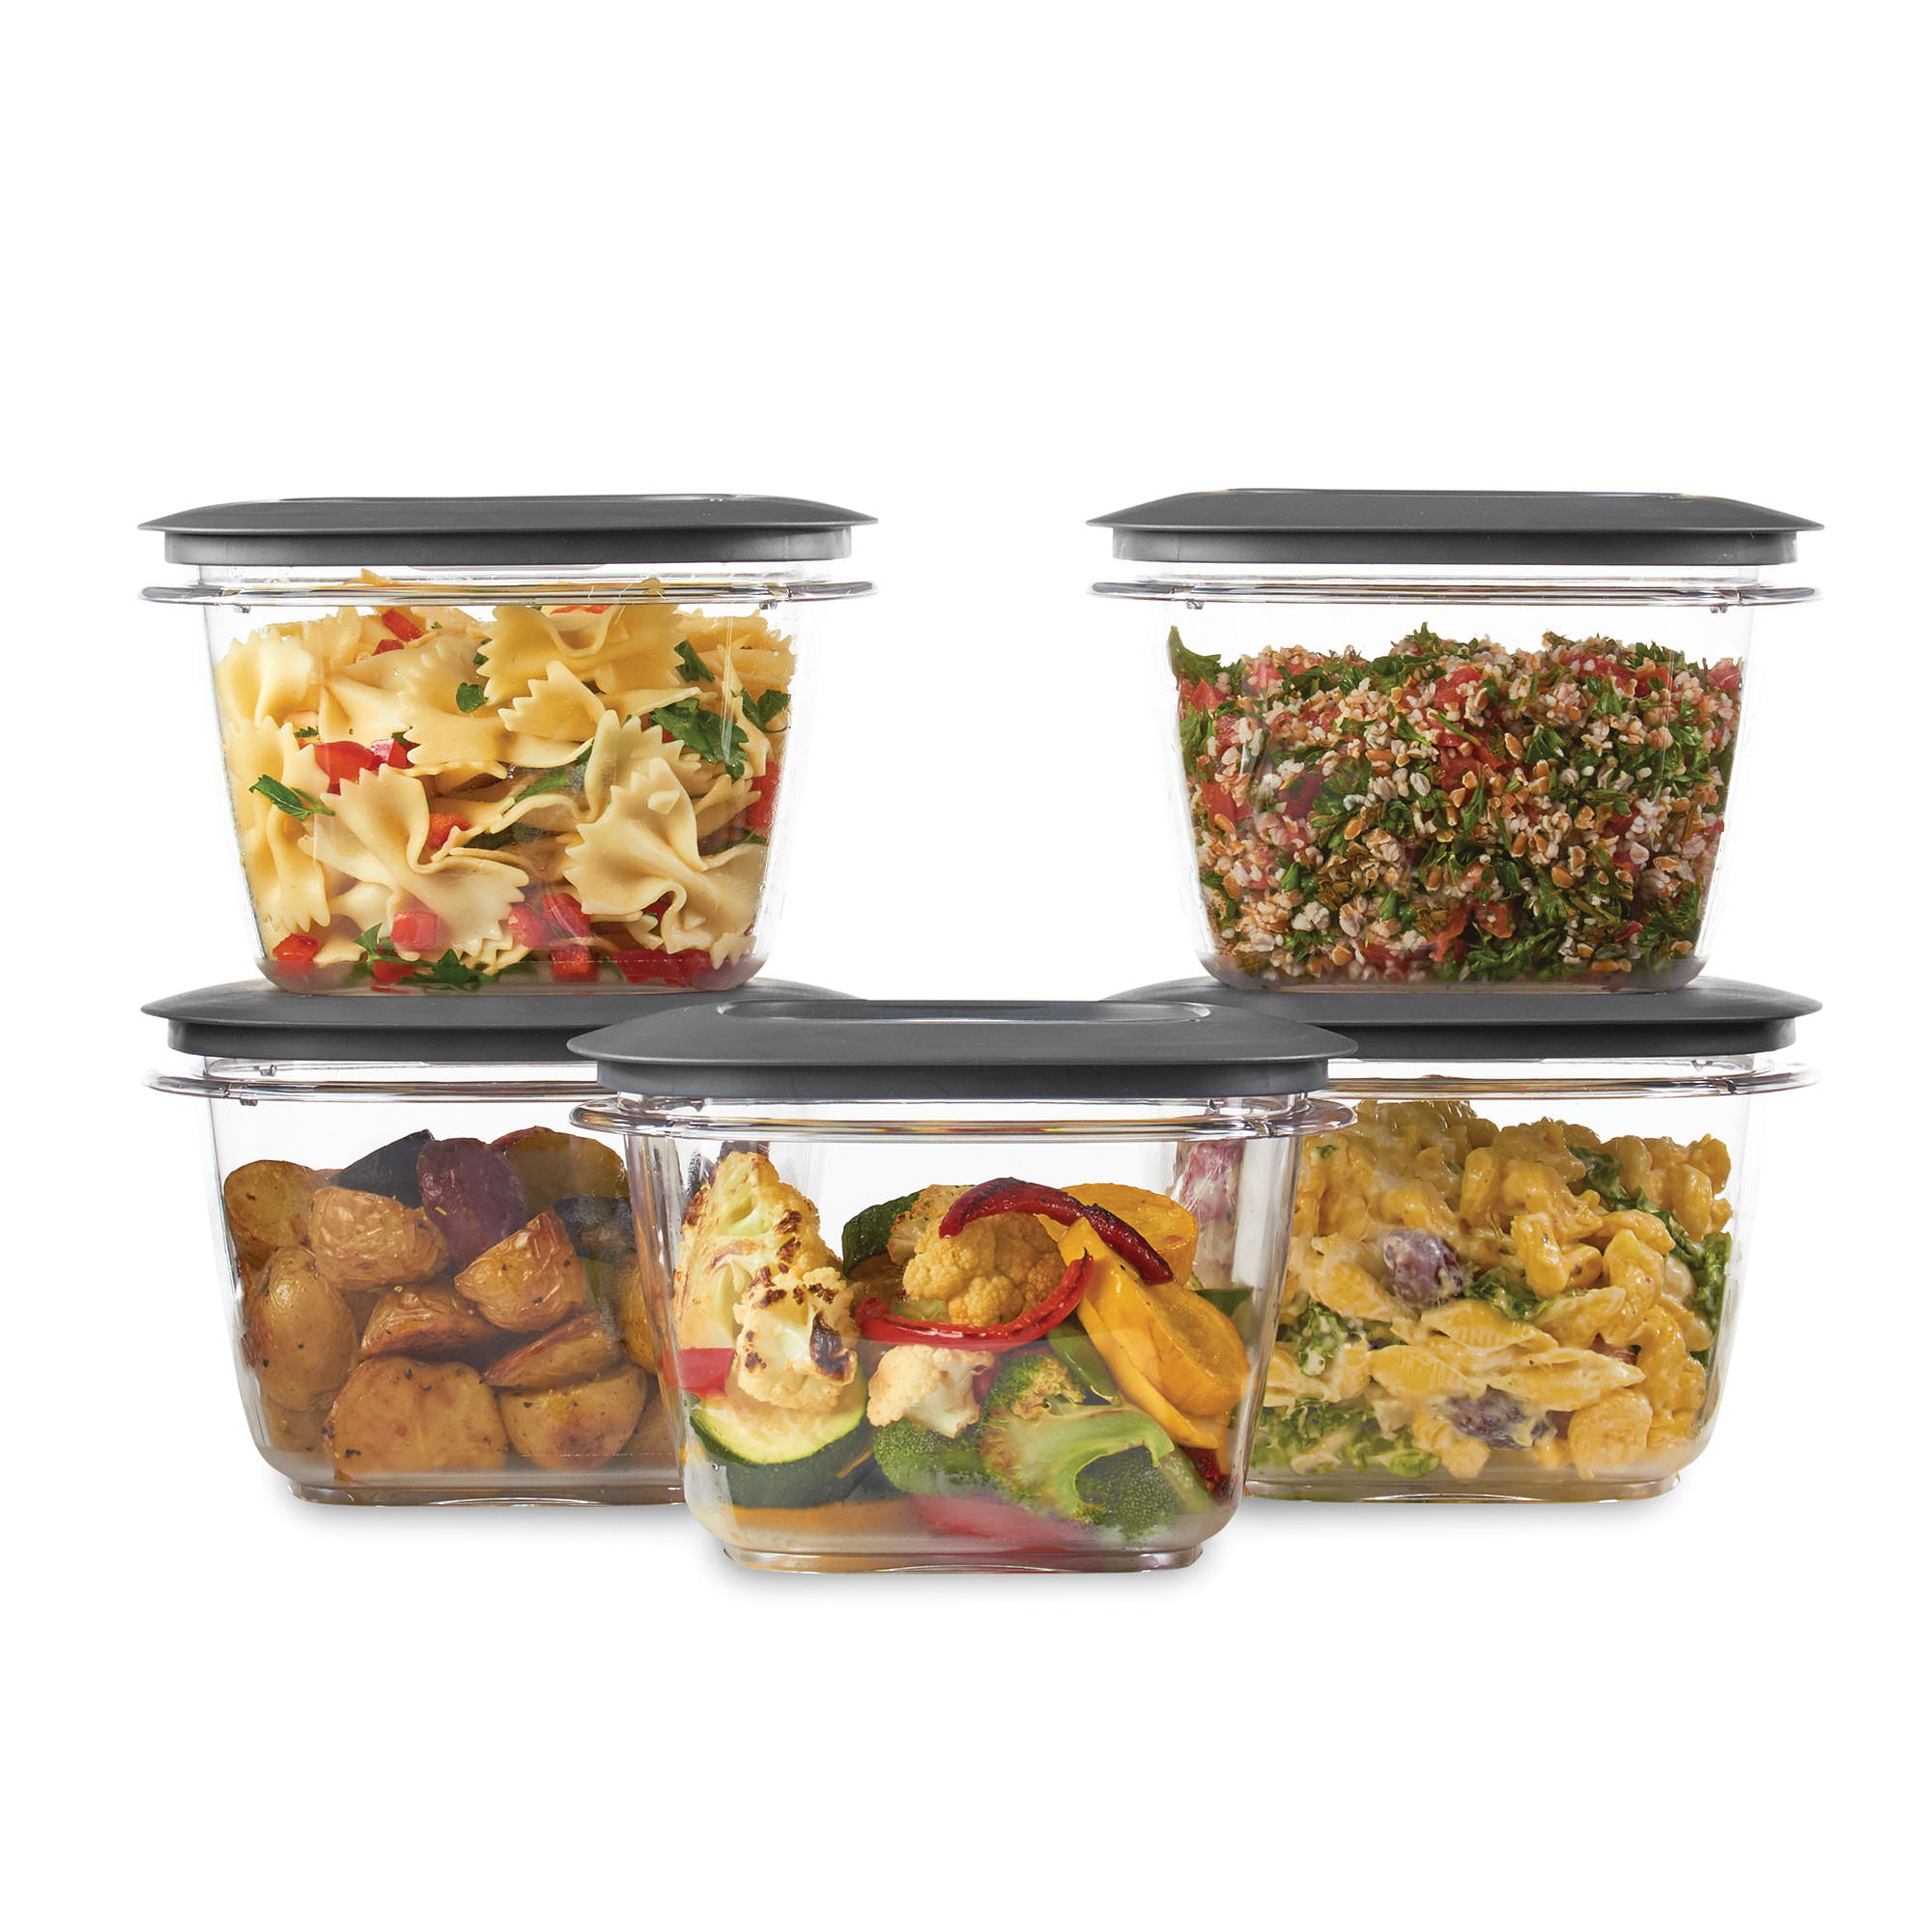 Utensilux Rubbermaid Premier, 3 Cup 5 Cup and 7 Cup Premier Flex & Seal Food Storage Set, 3 Triton Containers, 3 Grey Flex and Seal Lids, 6 Piece